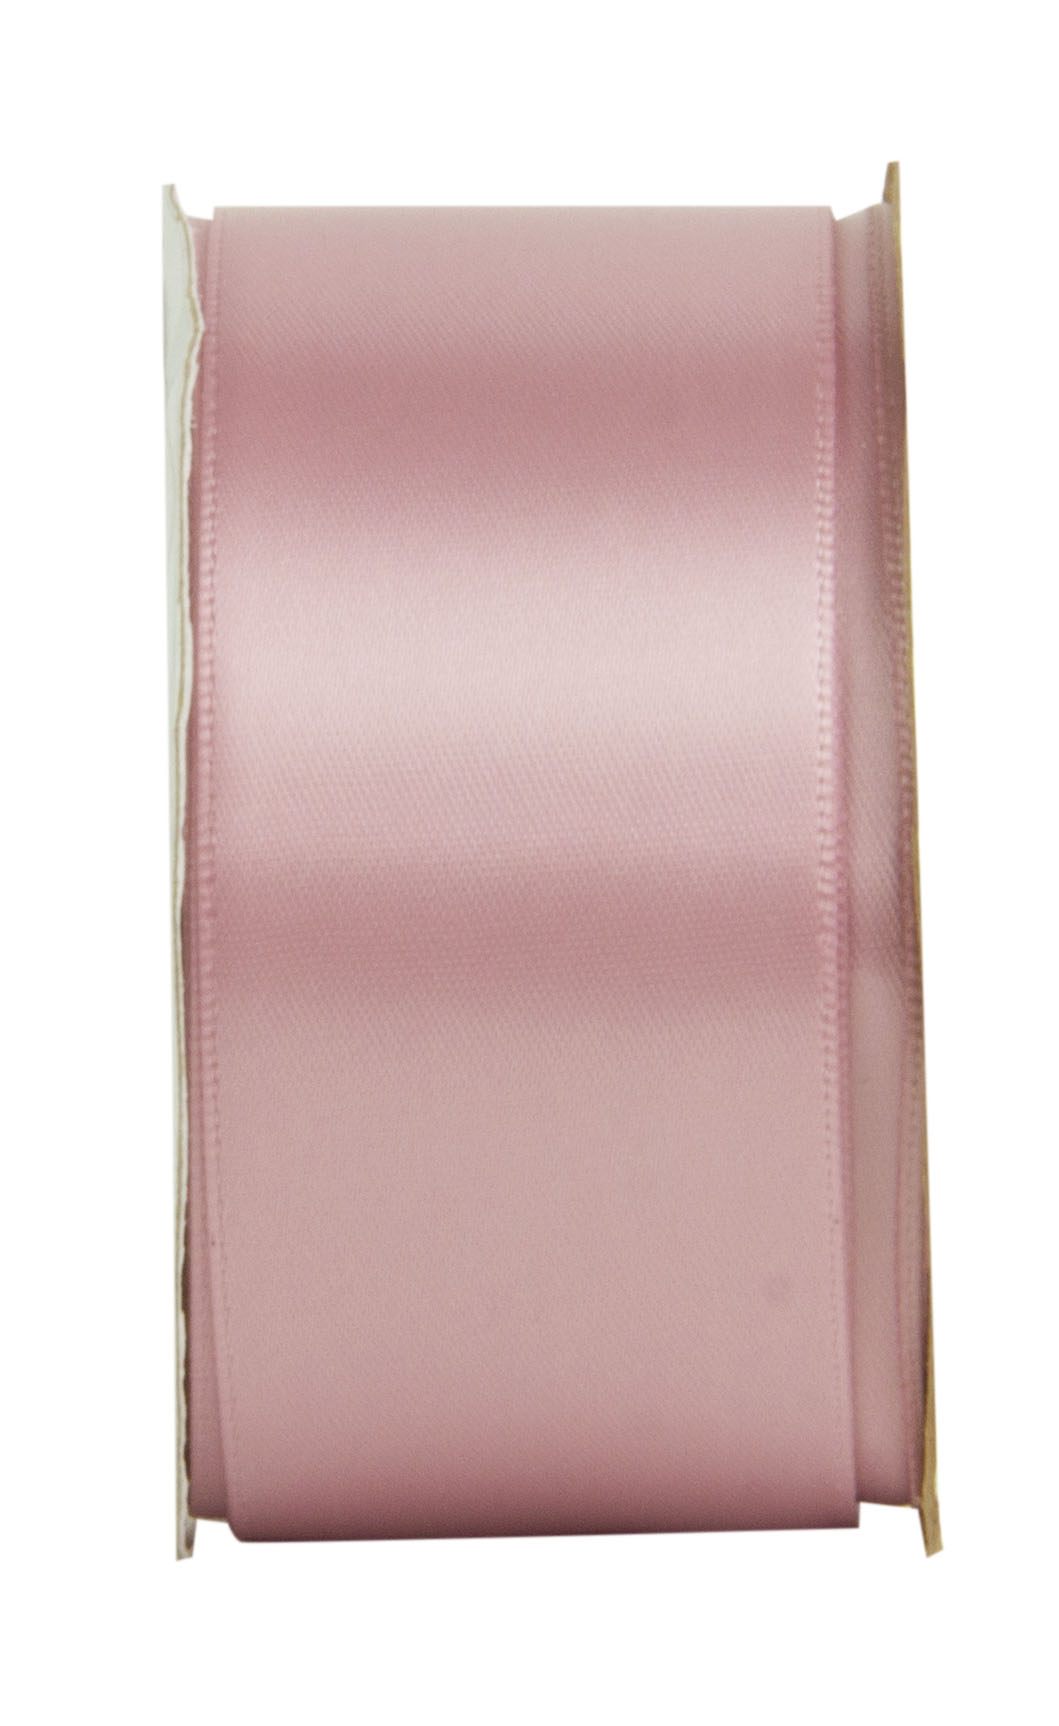 Offray Ribbon, Chateau Rose Pink 1 1/2 inch Double Face Satin Polyester  Ribbon, 12 feet 